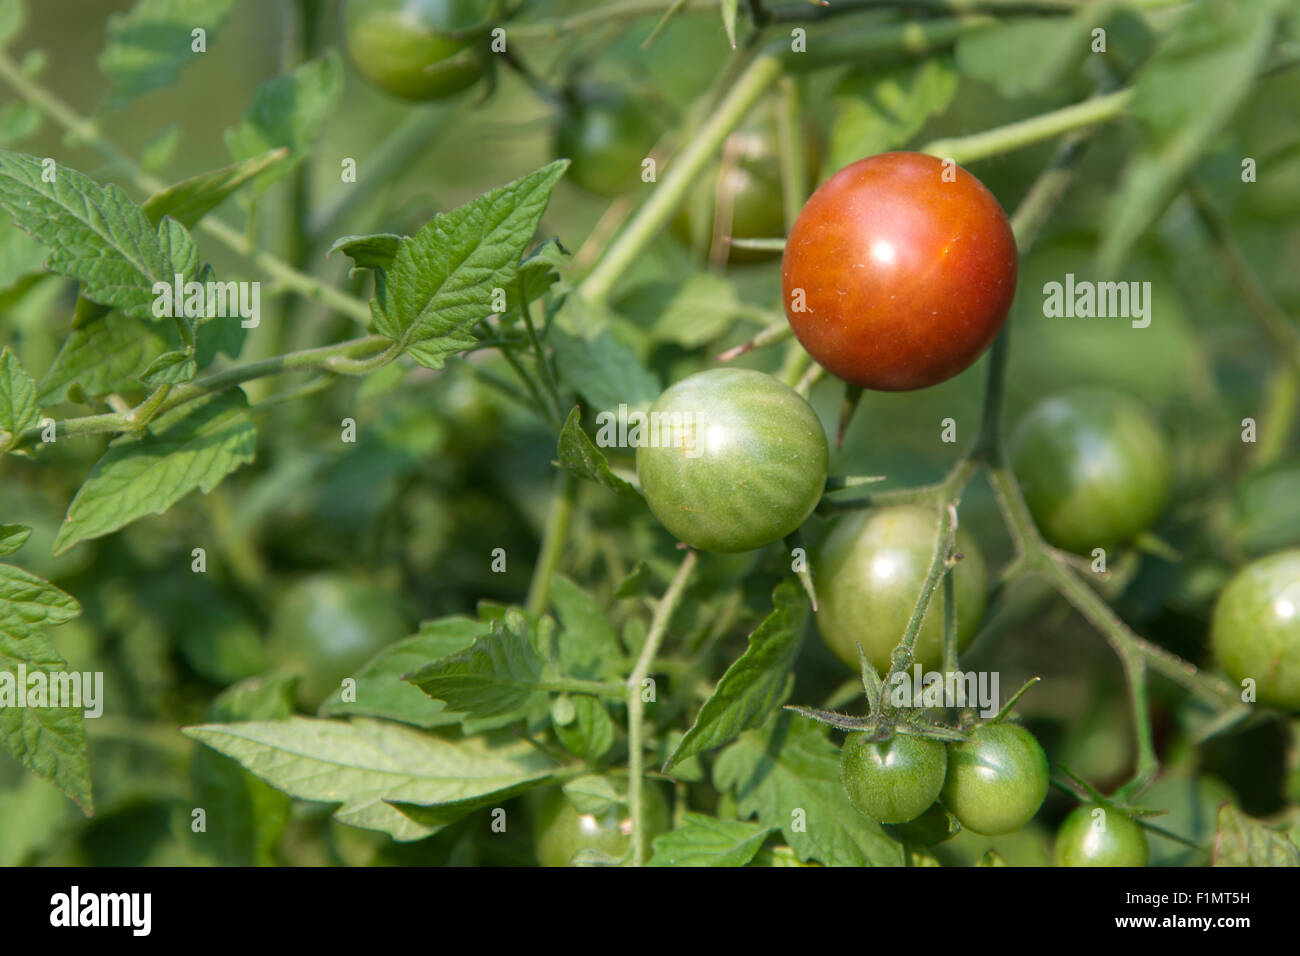 One red ripe cherry tomato growing on a vine with little green tomatoes in a backyard garden. Stock Photo